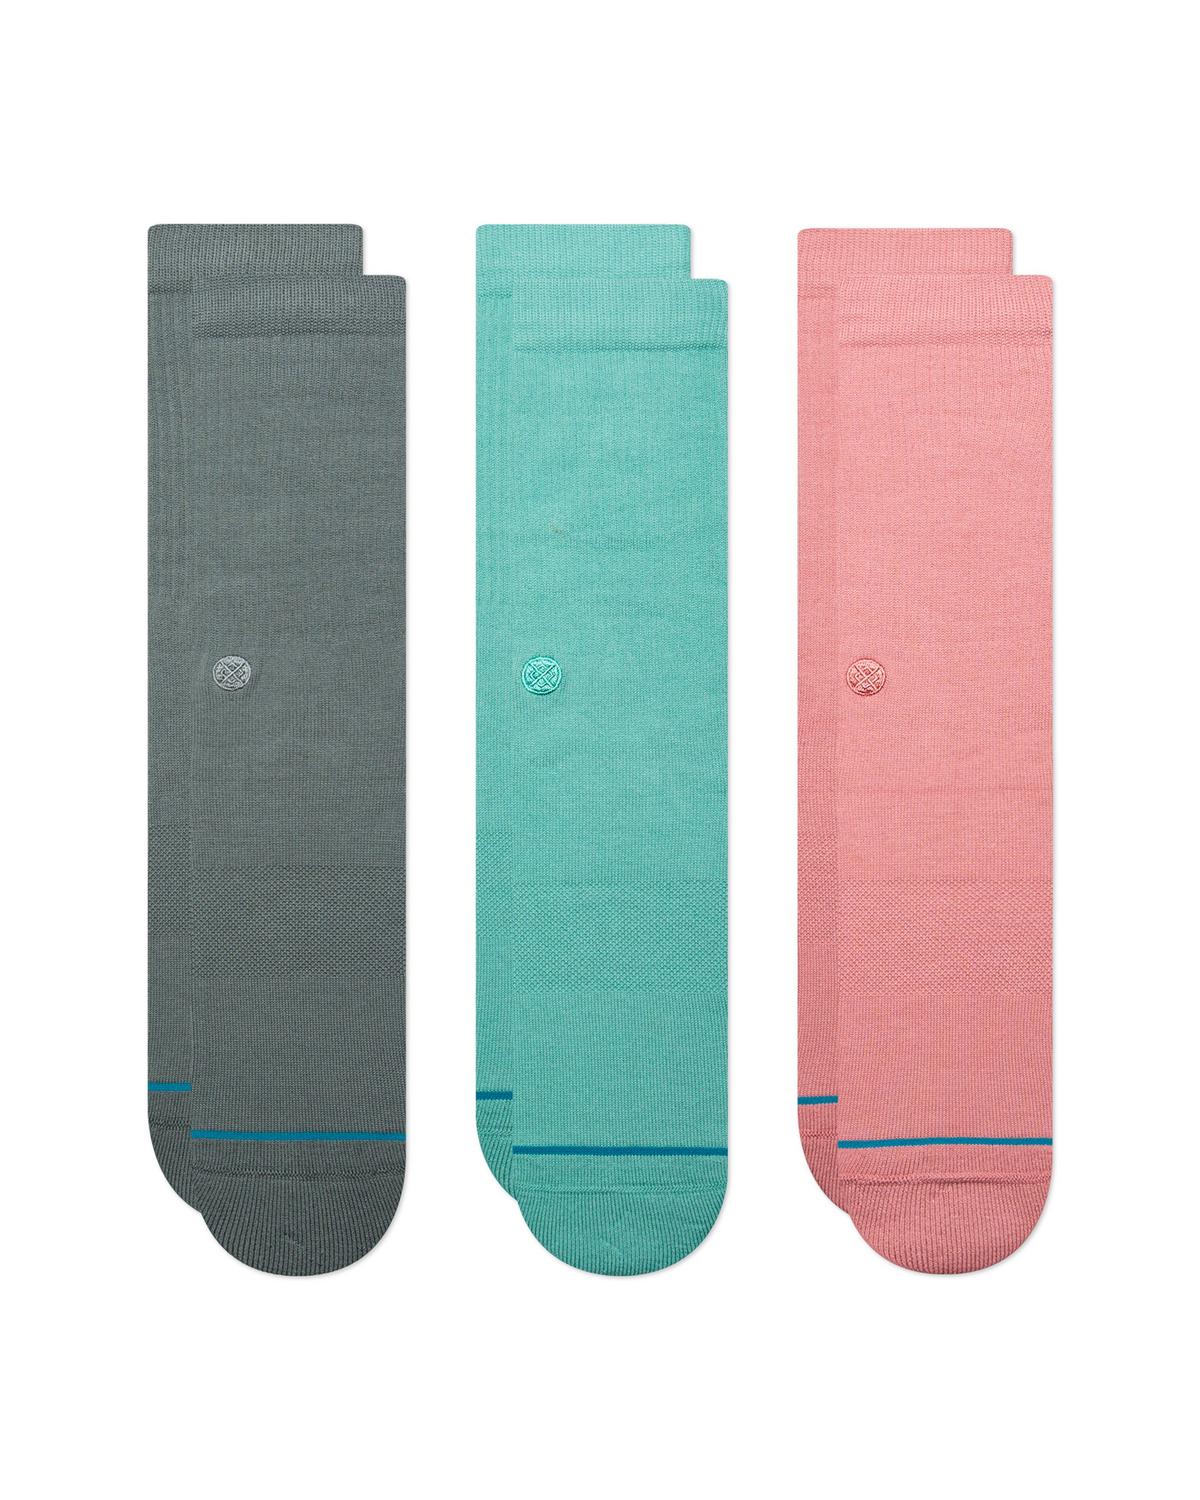 STANCE Icon Crew Socks - 3 Pack  -  Green